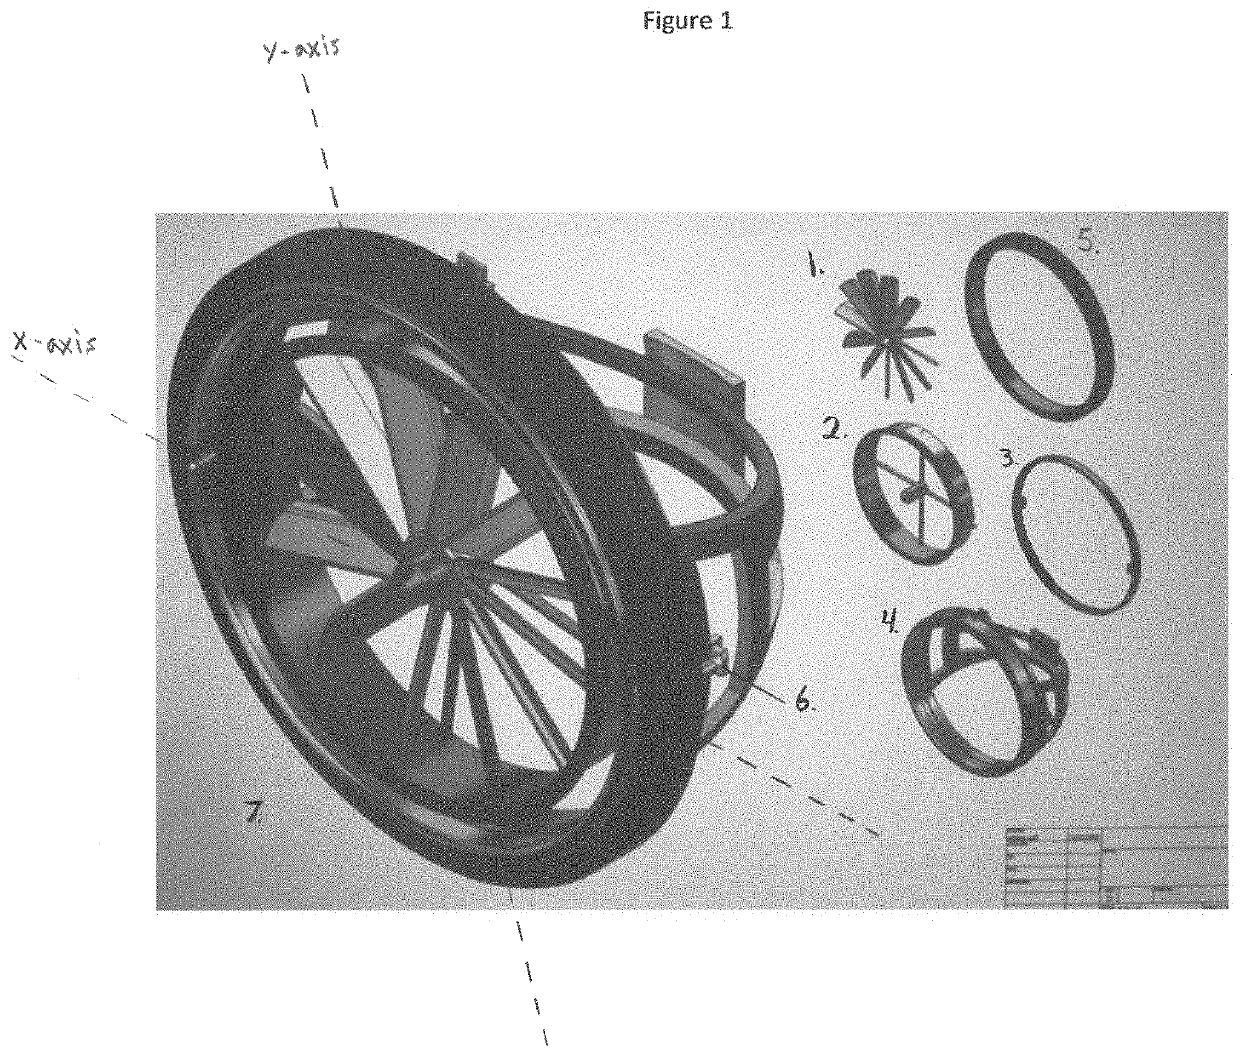 Propulsion system for an aerial vehicle